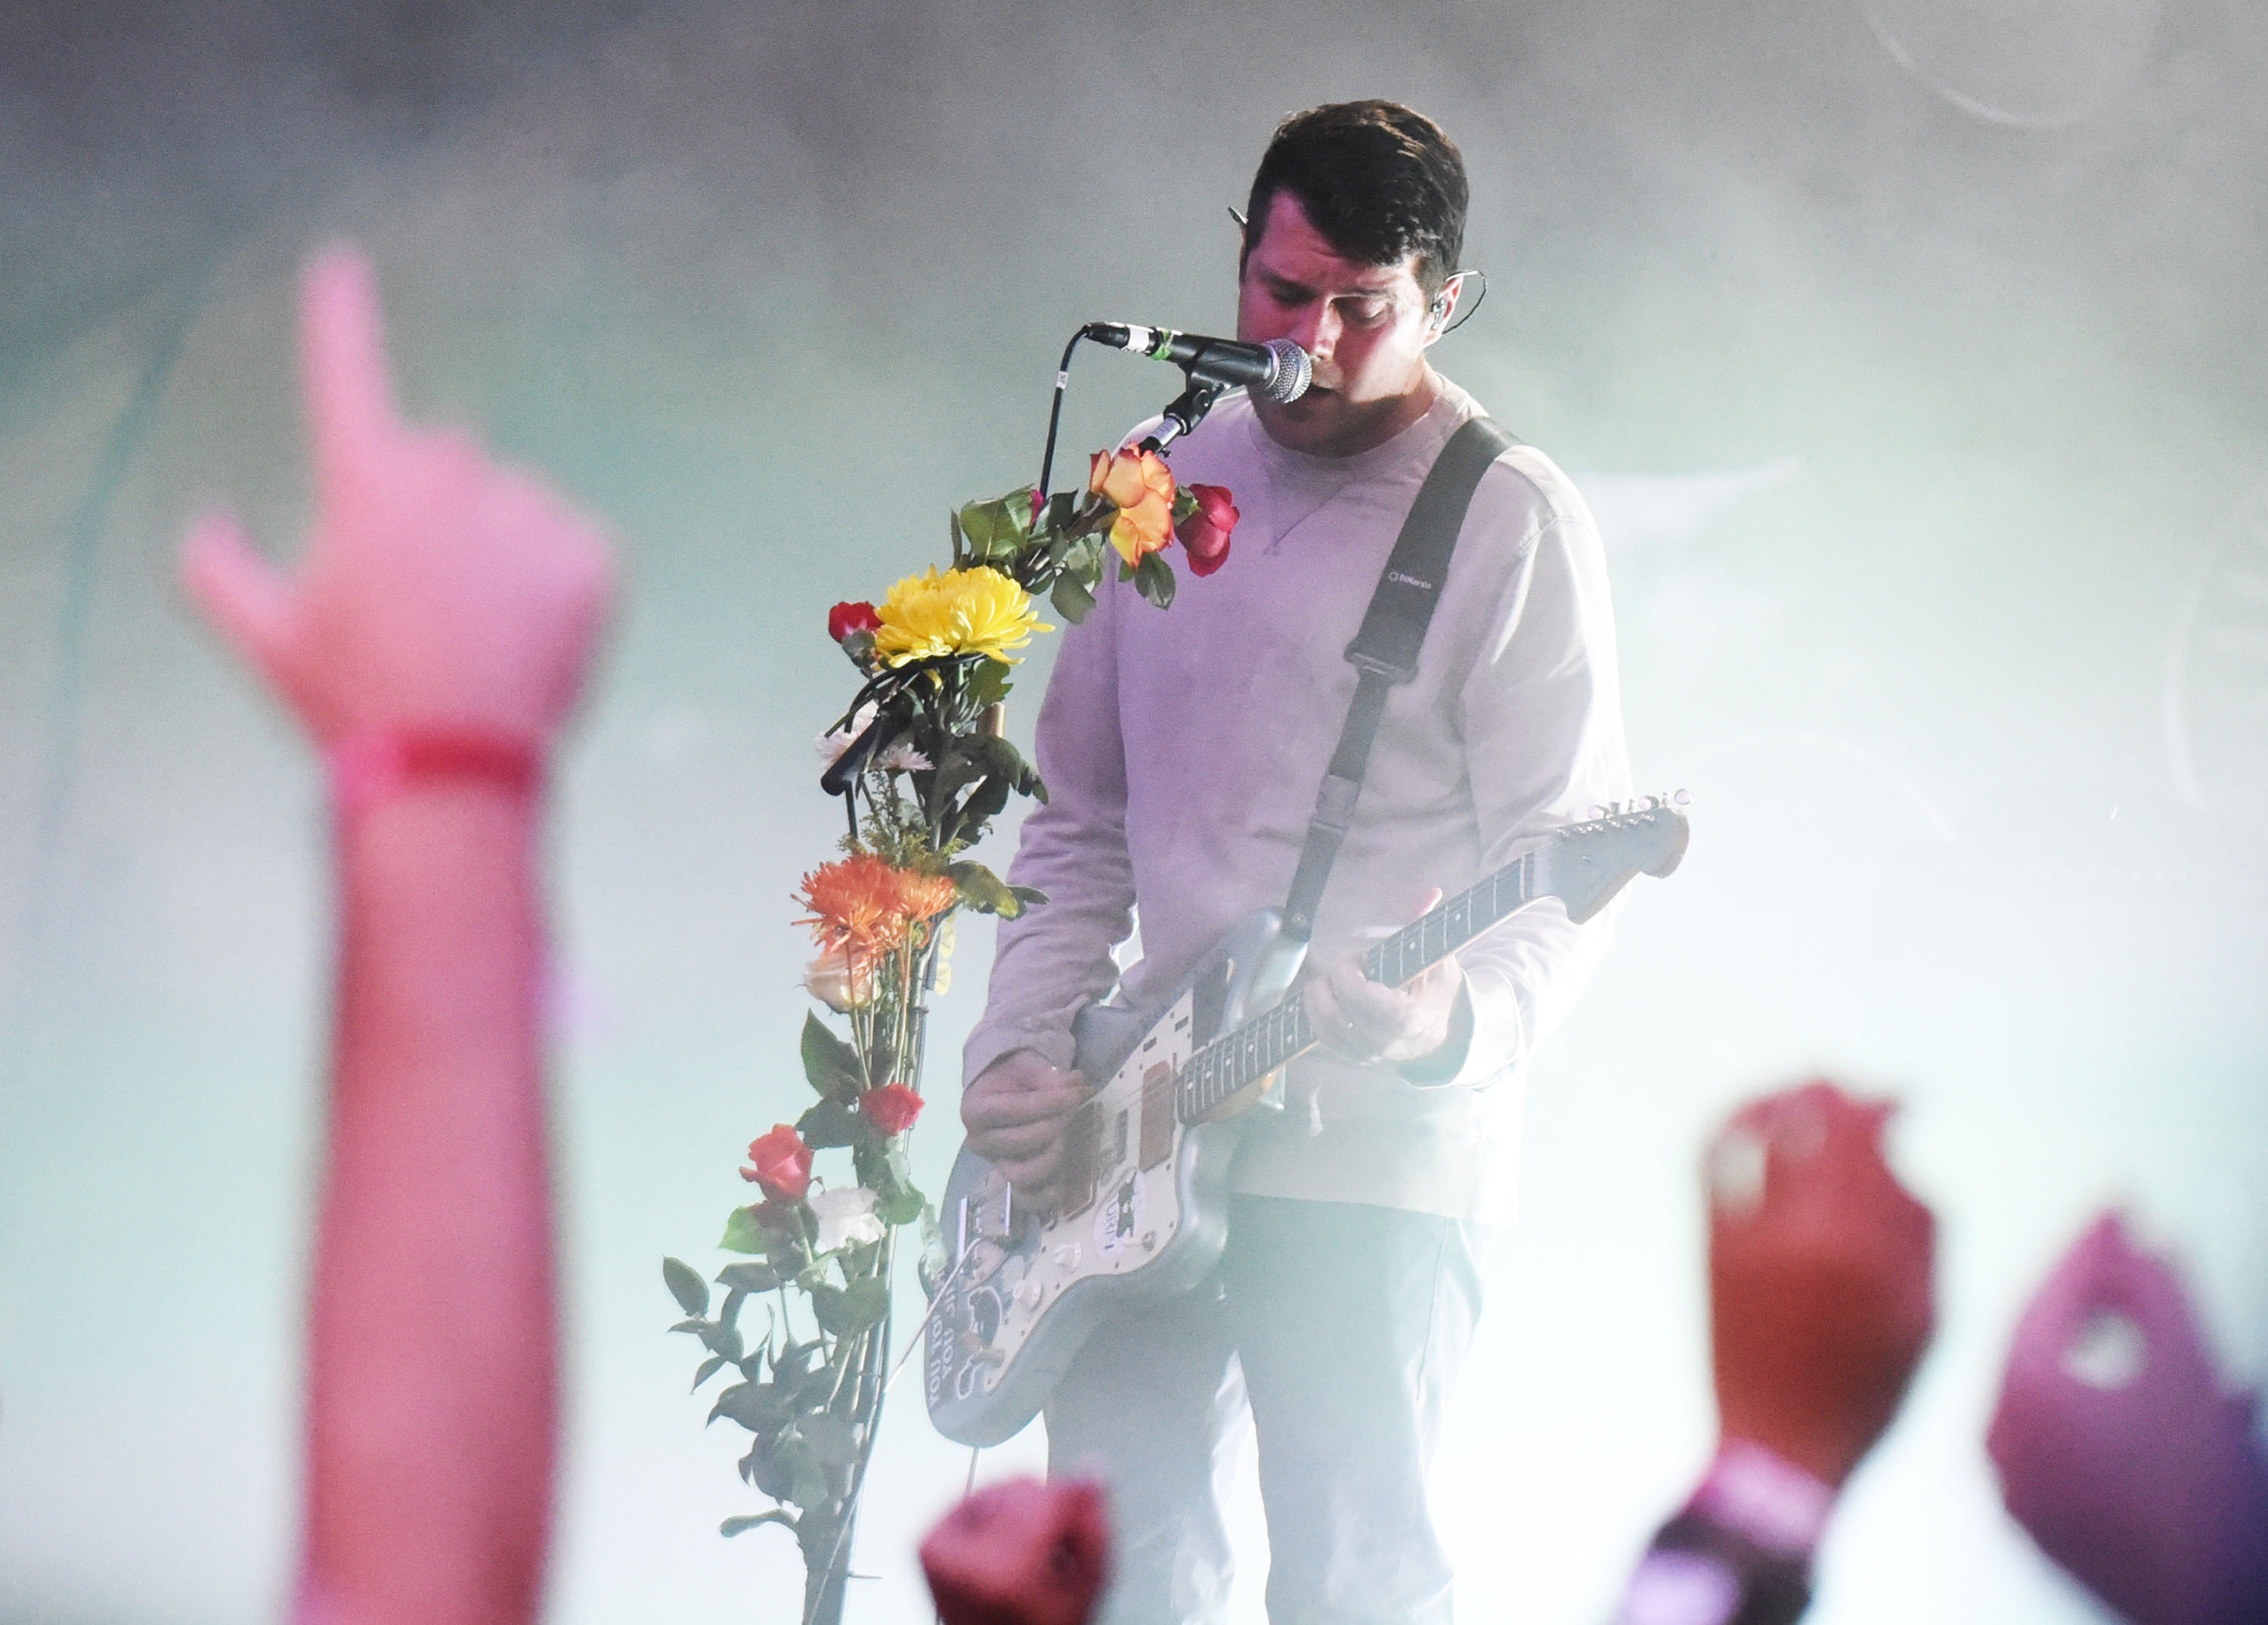 Jesse Lacey - The Iconic Frontman of Brand New